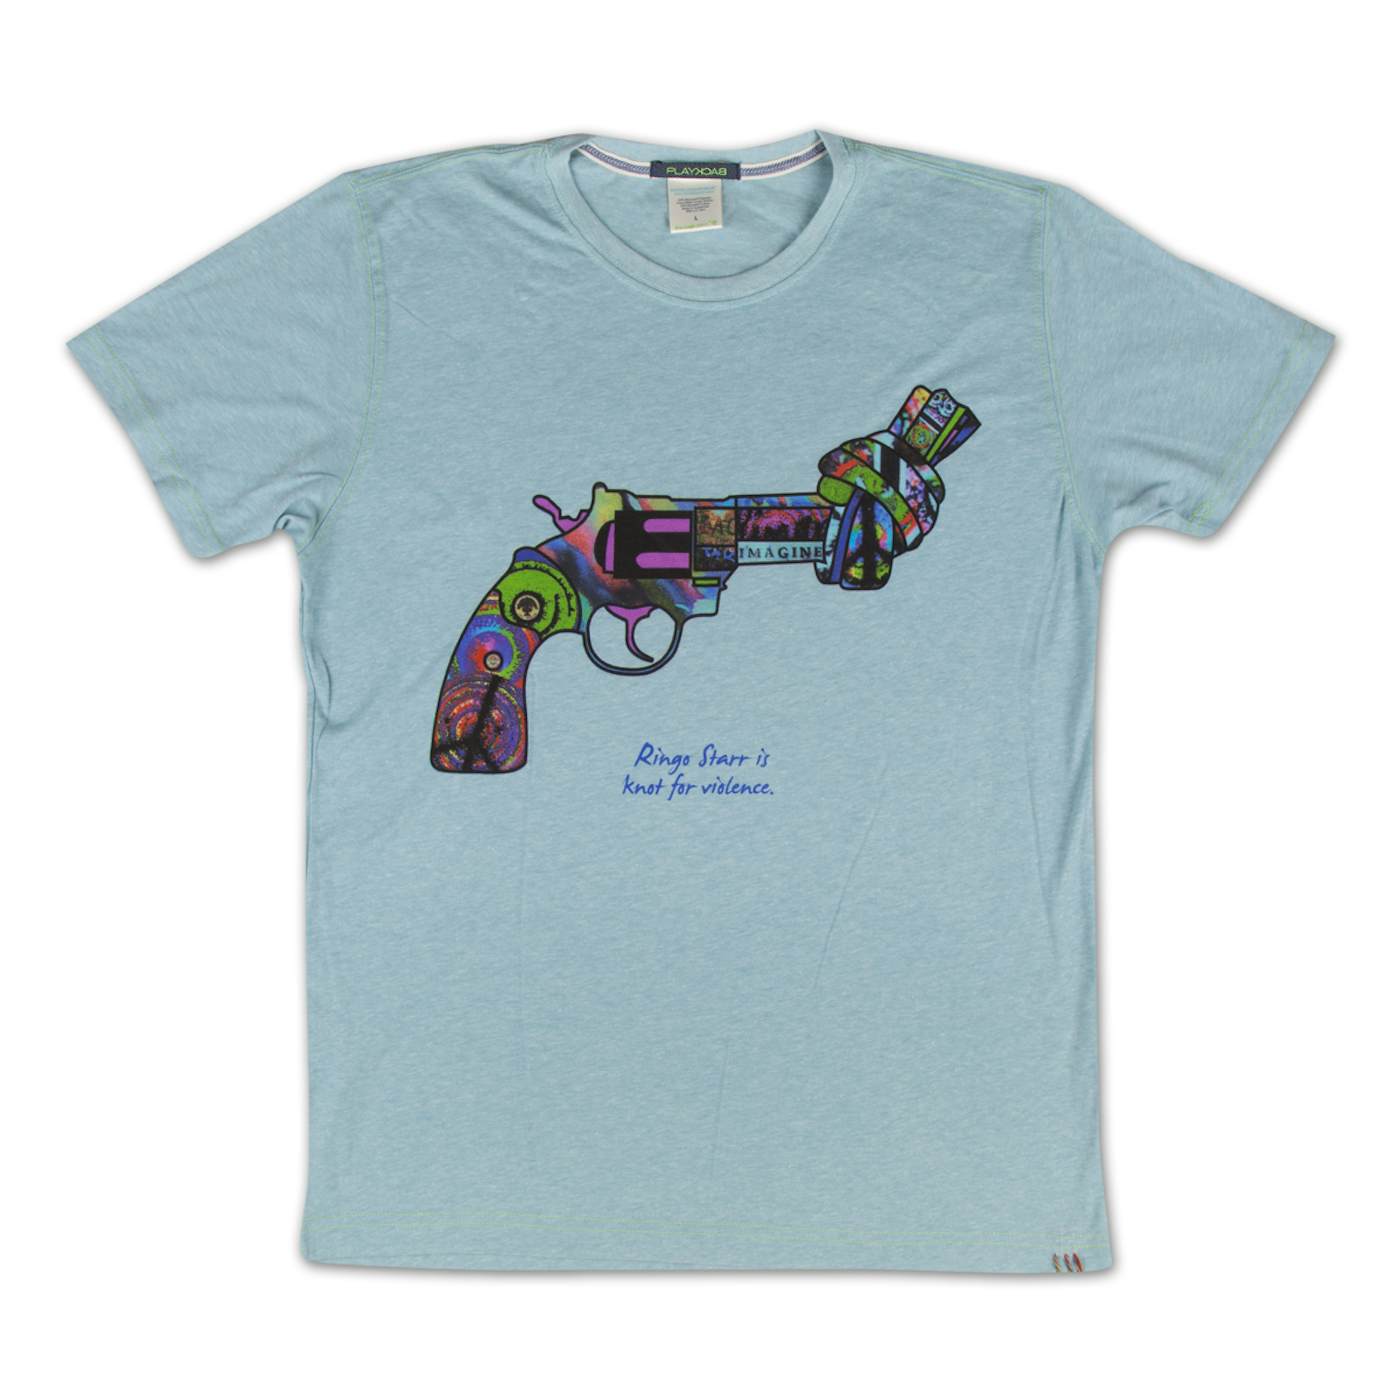 Ringo Starr Knot for Violence Ladies T-Shirt